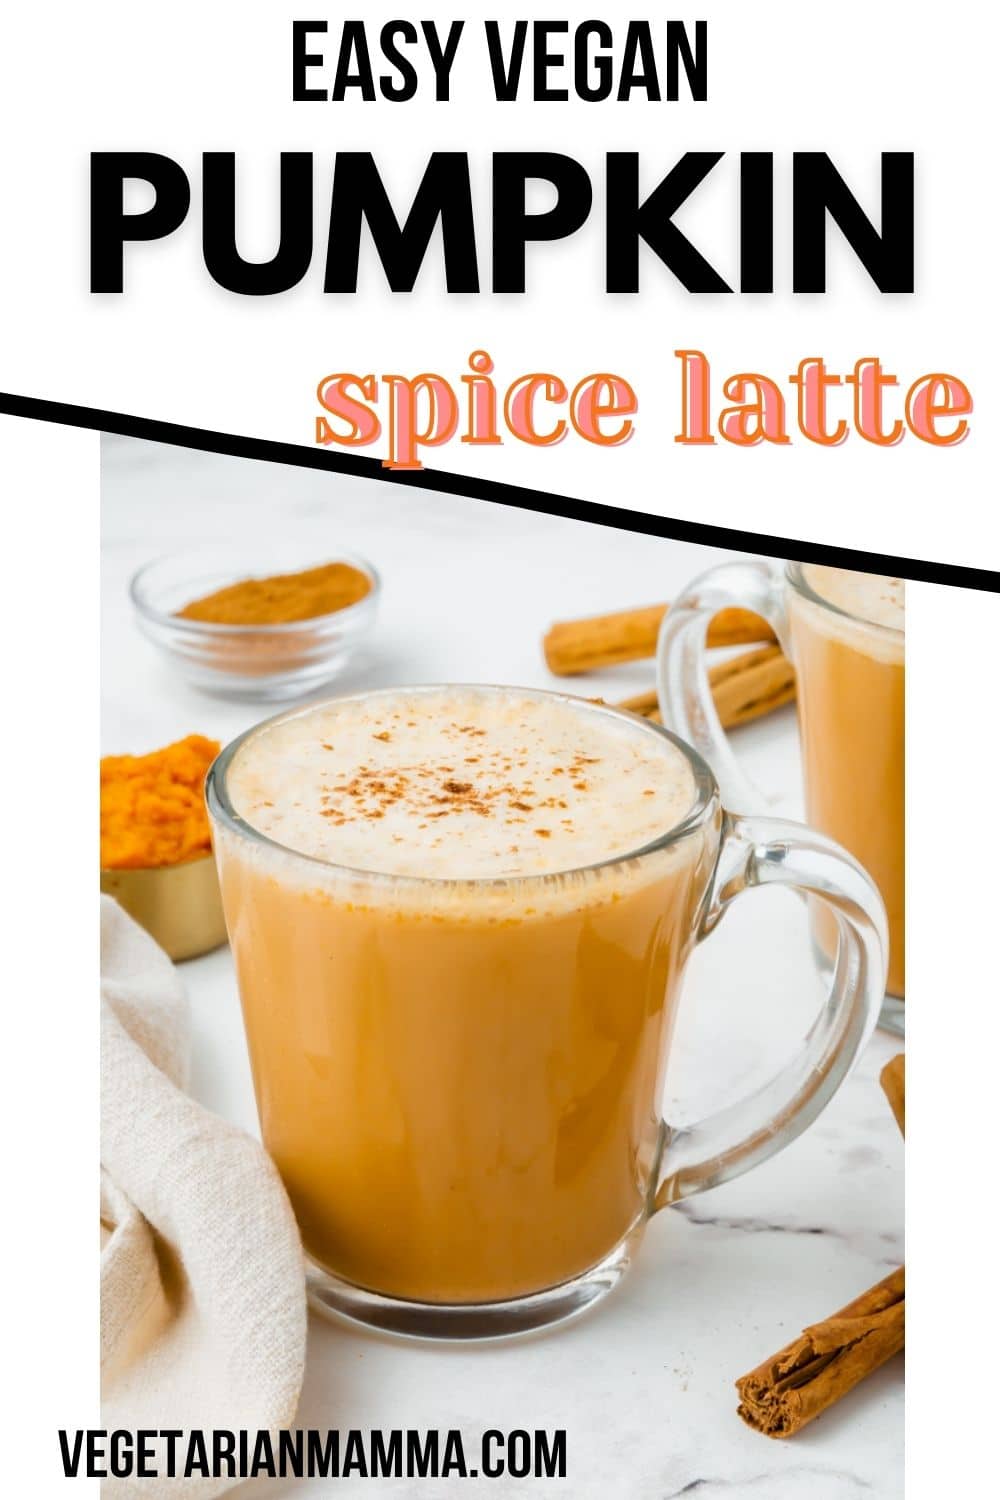 Skip the Starbucks line and make your own vegan pumpkin spiced latte at home! You only need 6 basic ingredients to make this latte recipe — and no fancy equipment required!